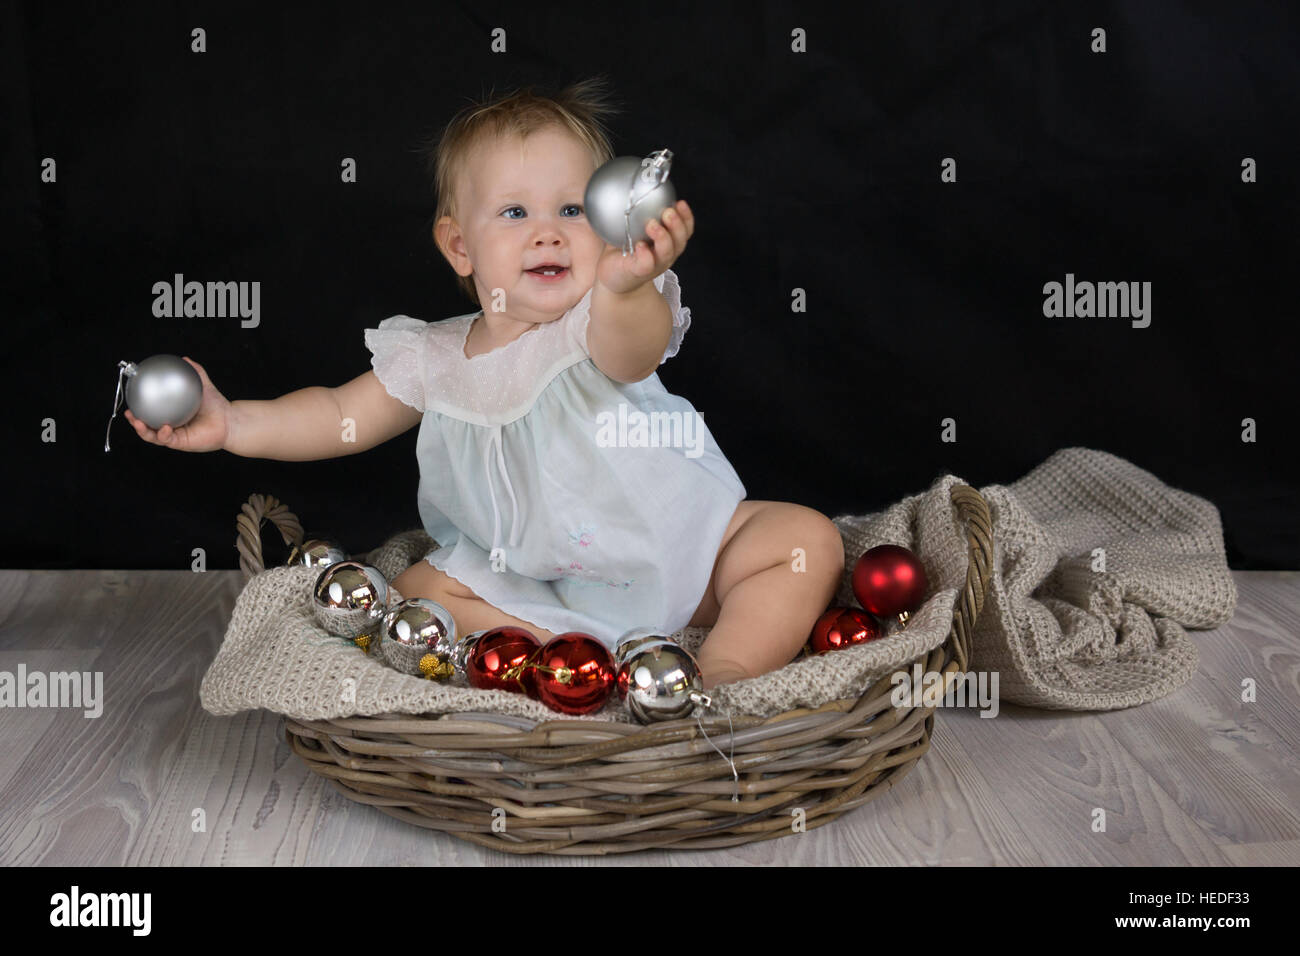 Baby girl holding and playing with Christmas balls Stock Photo